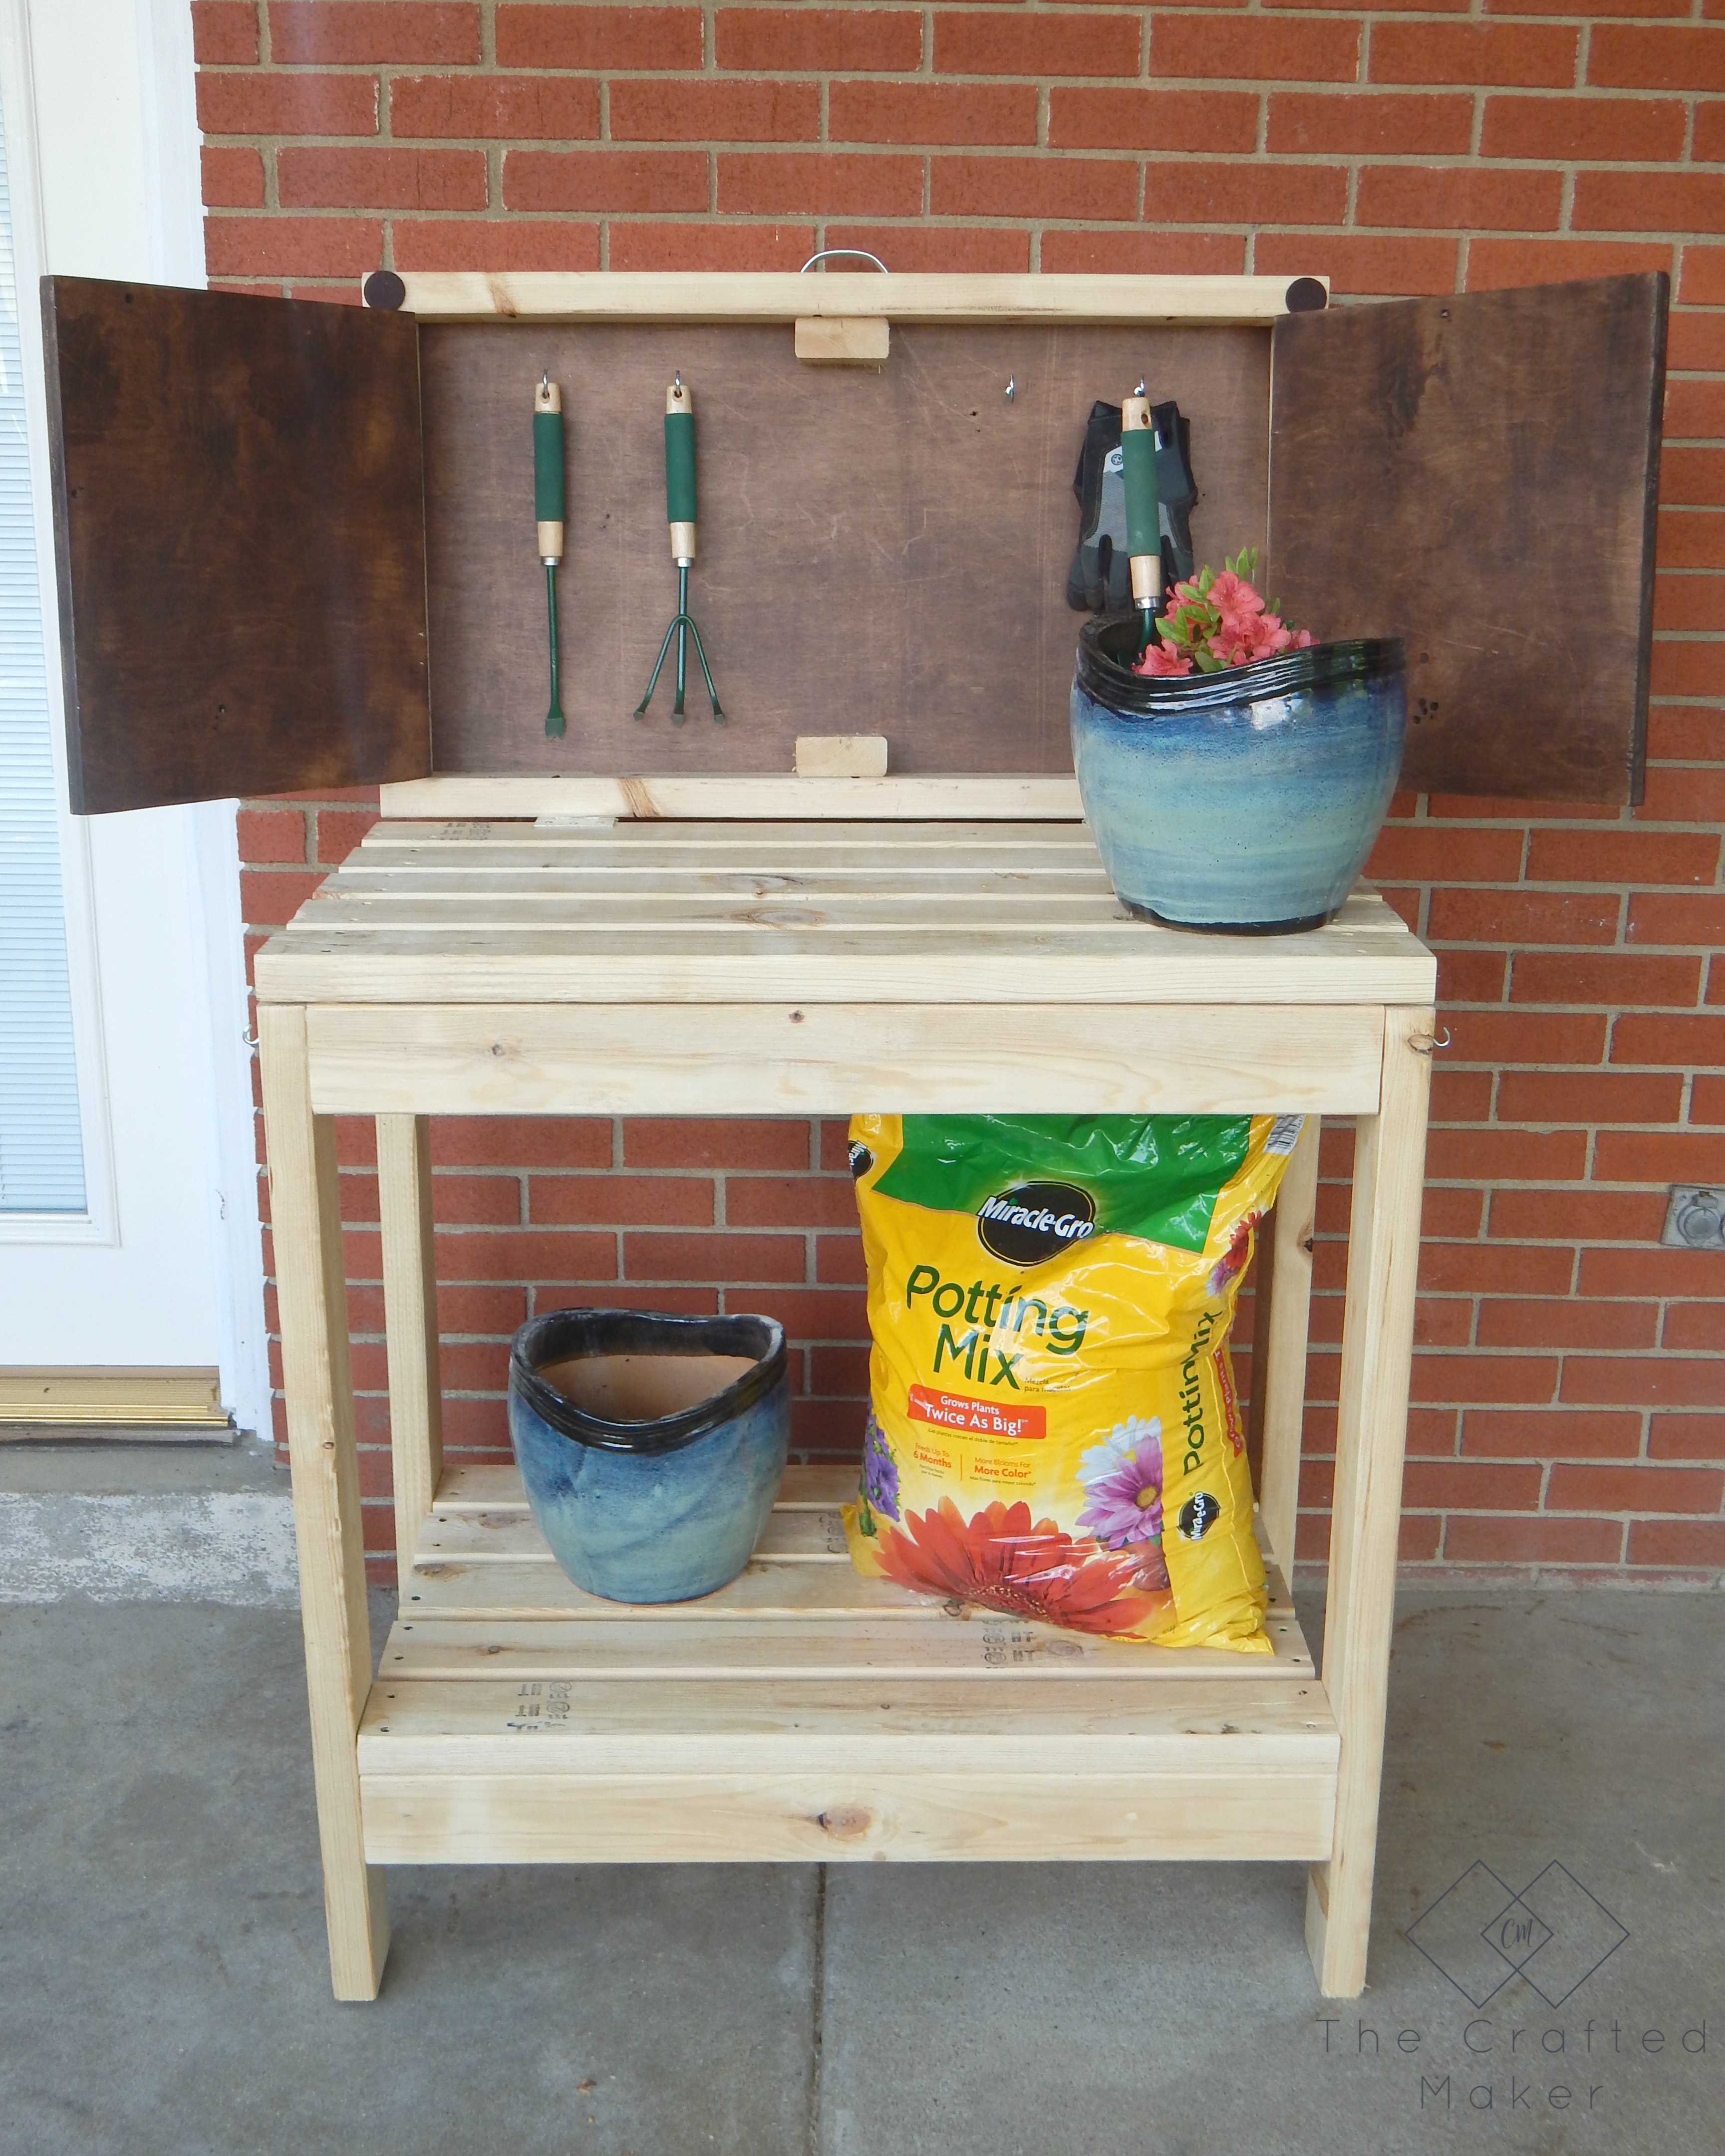 Transform your garden party to a gardening party with this DIY Party Cart / Potting Bench.Lift up to find hidden storage for all of your garden tools.